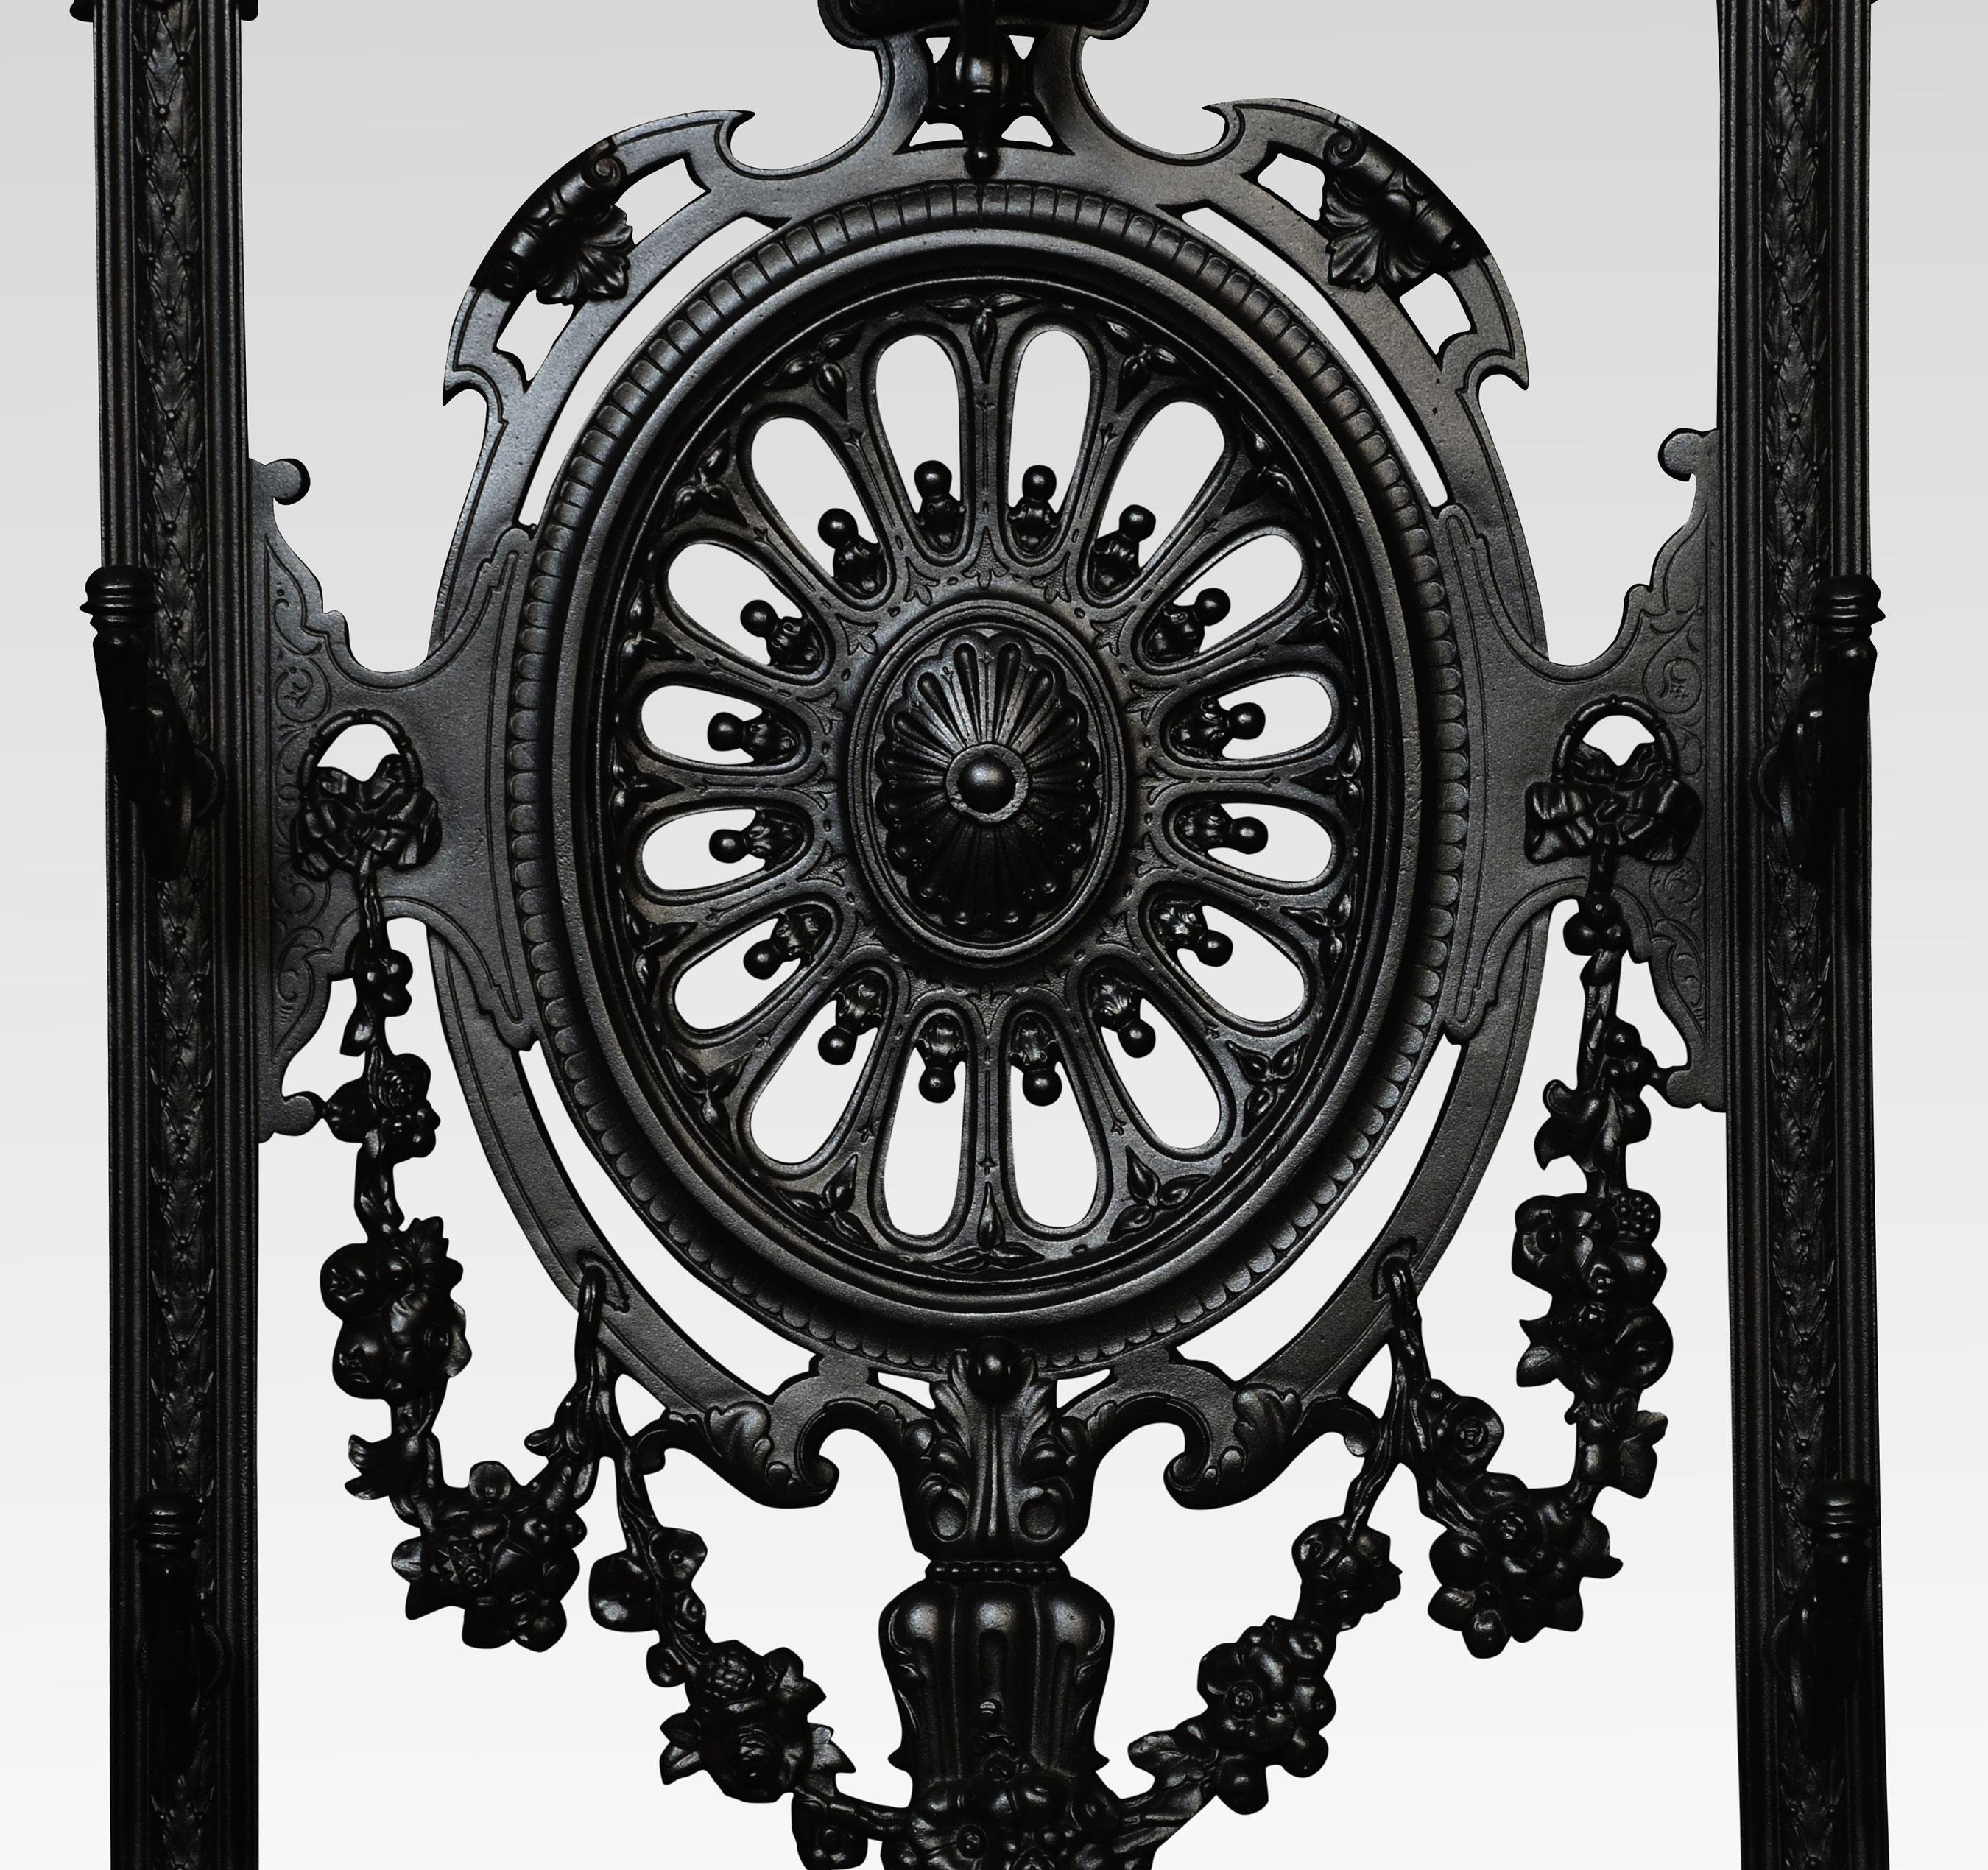 Coalbrookdale-style cast iron hall stand, of arched form, with eight scrolled hooks, the central pierced oval with cast leaf and fruit swags, over twin umbrella compartments, scroll and lattice detail above a pair of detachable drip trays, bearing